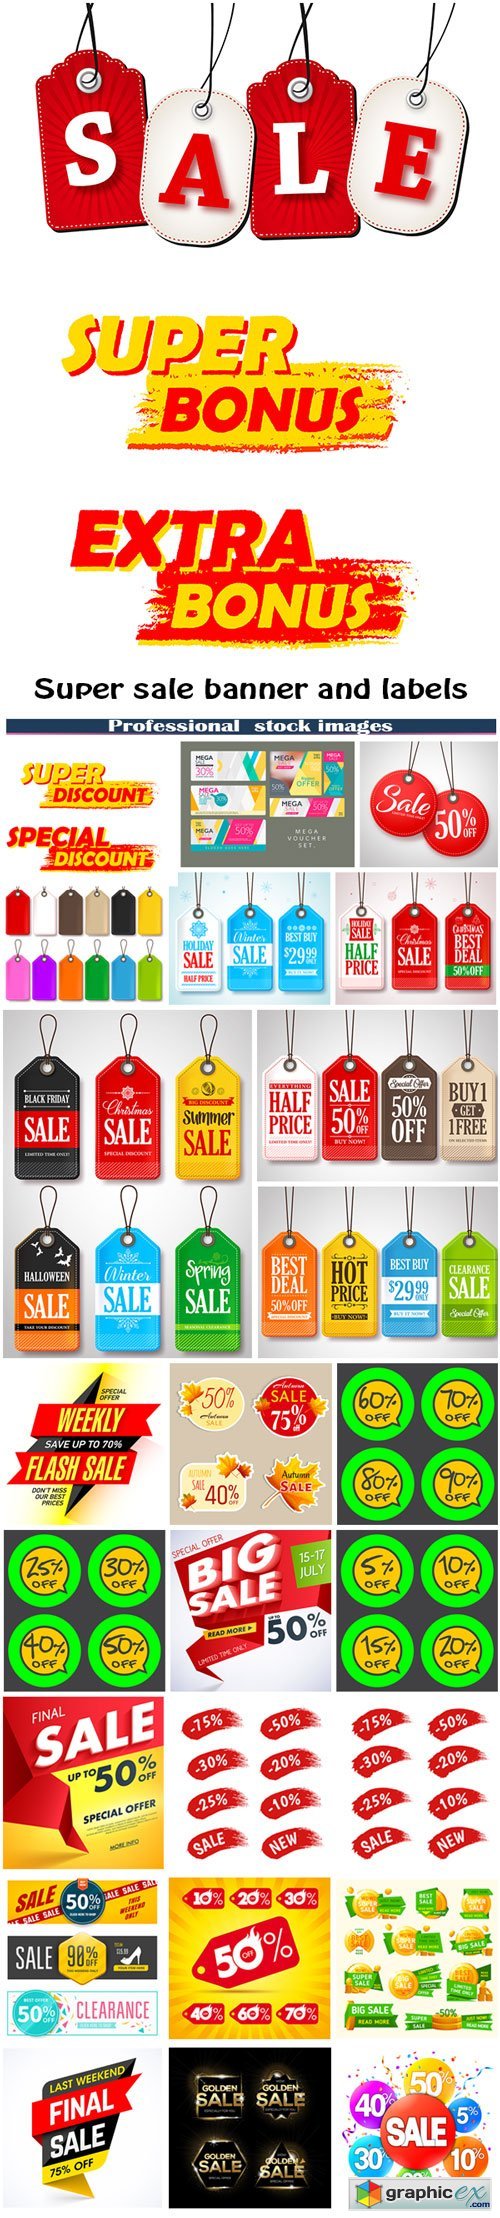 Super sale banner and labels